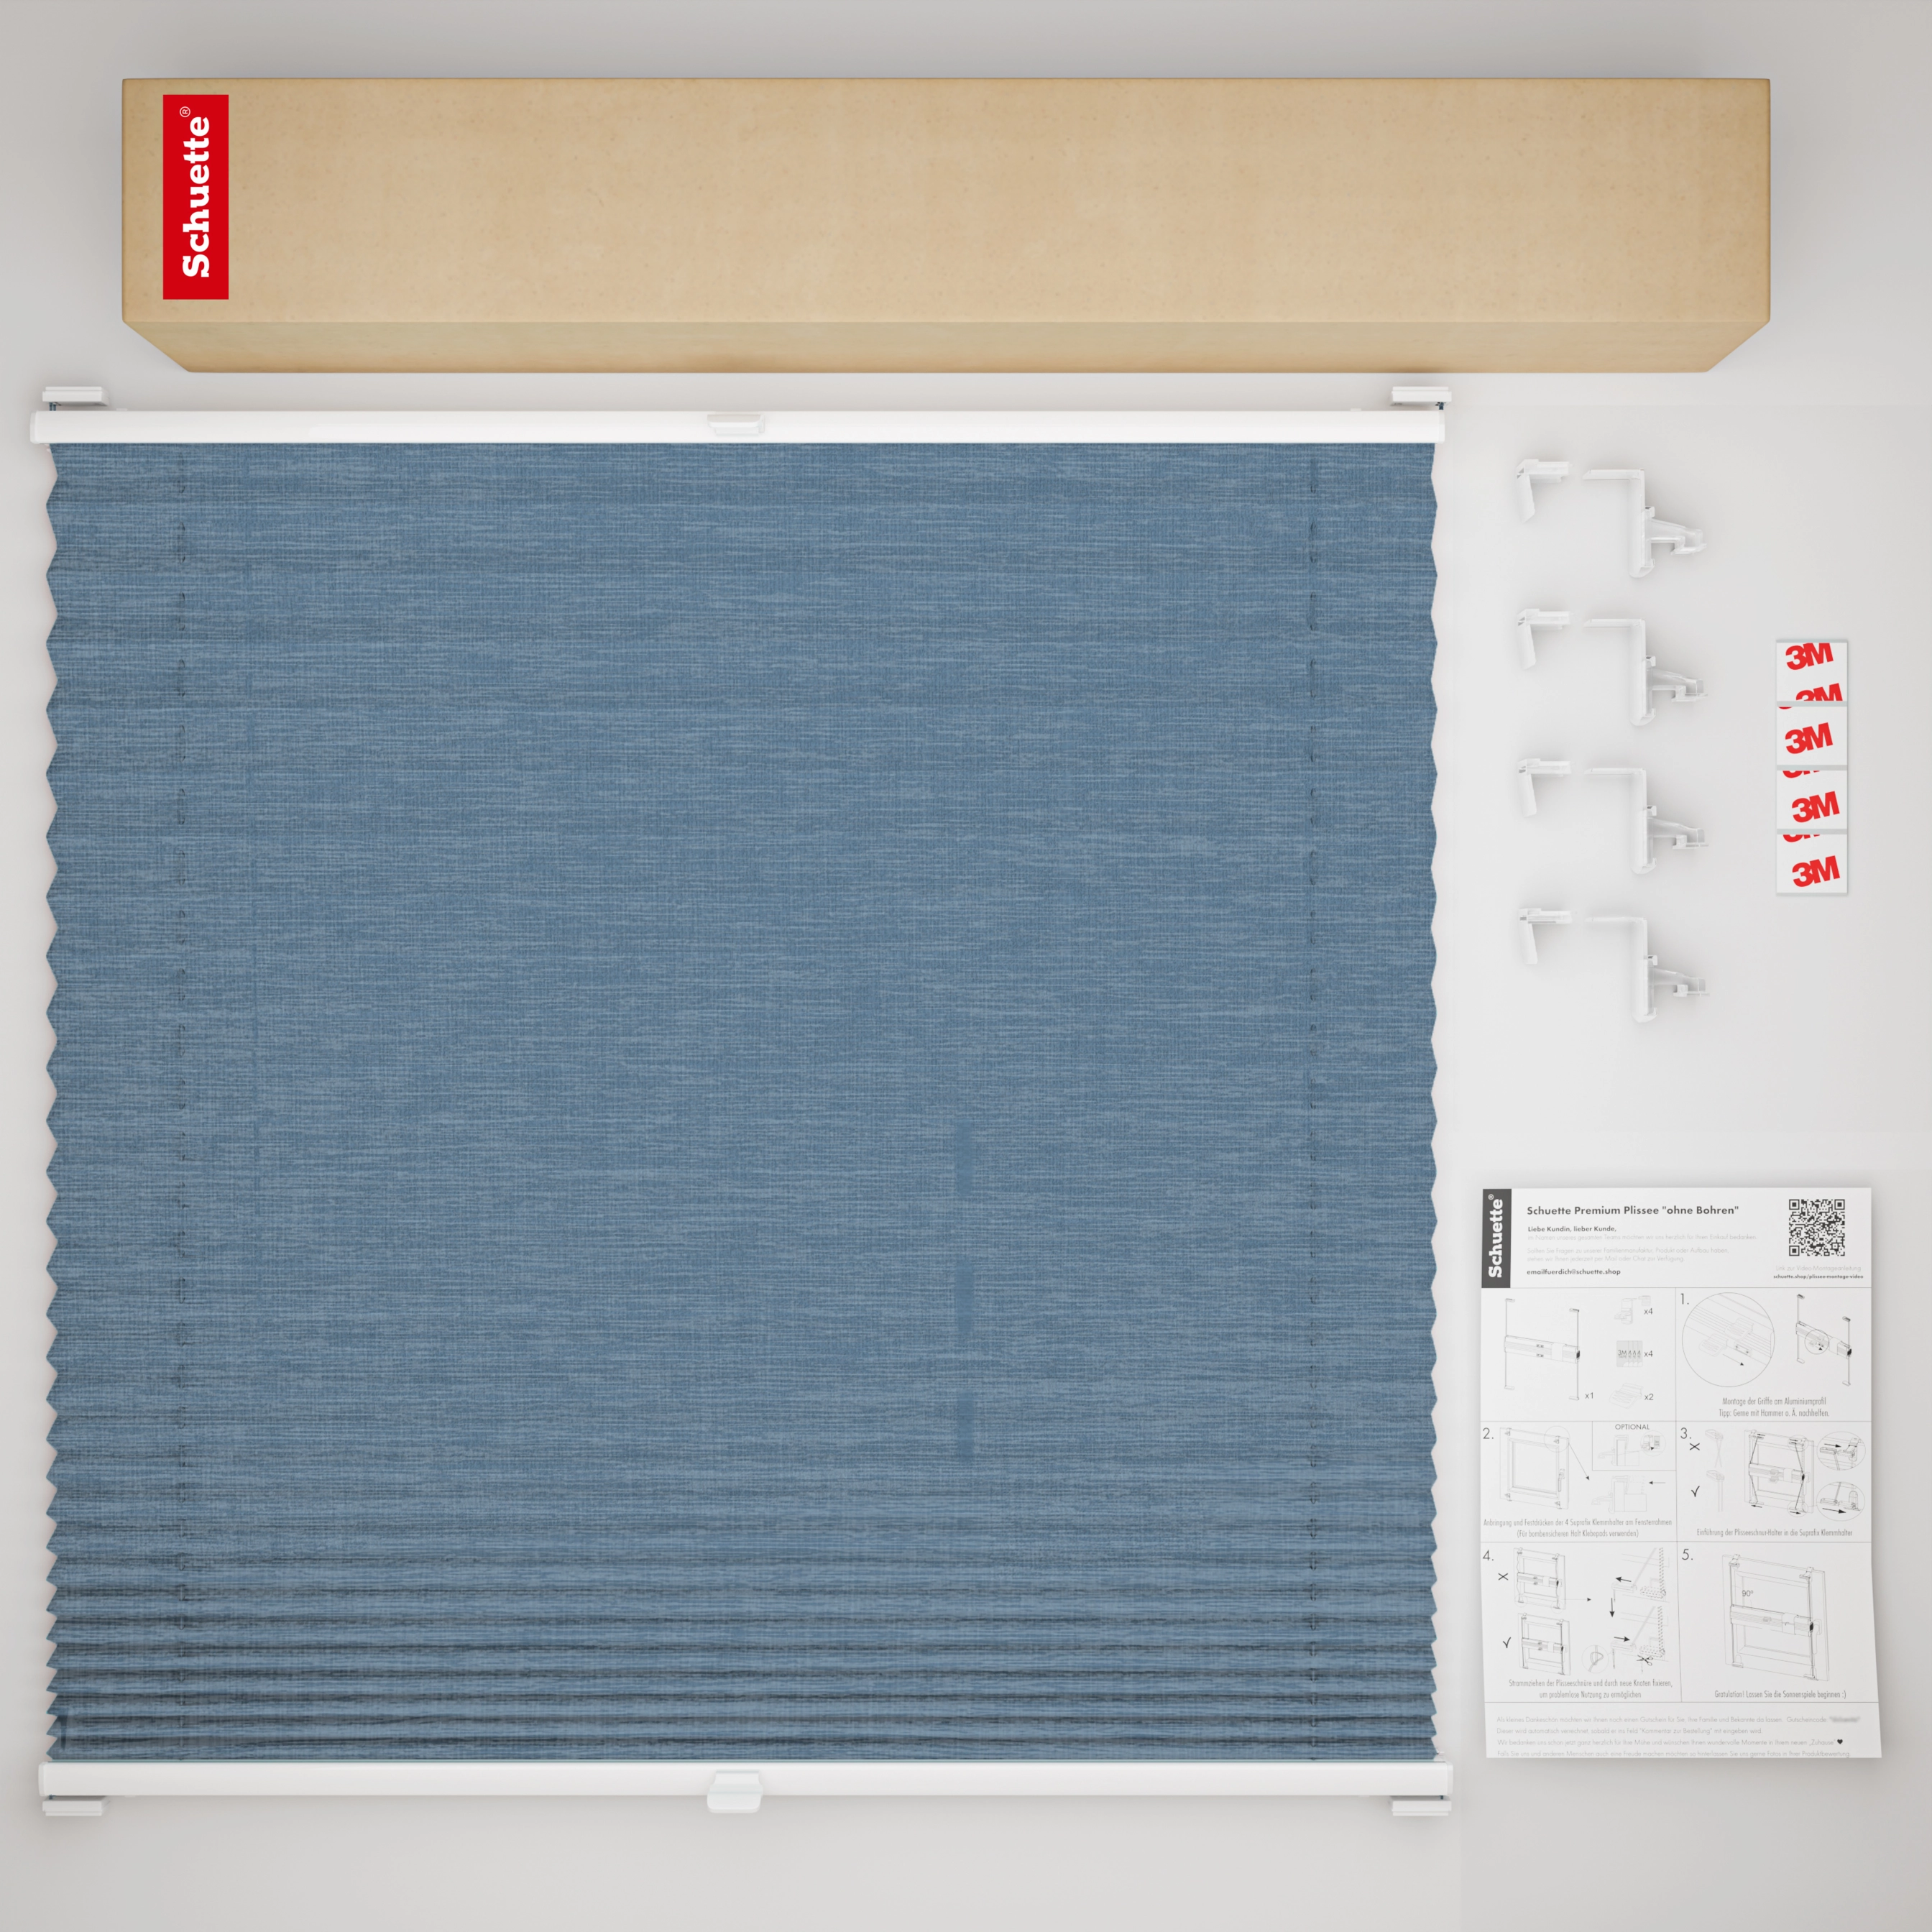 Schuette® Pleated Blind Made to Measure without Drilling • Suprafix Clamp holder “Incognito" Standard” • Melange Collection: After Rain (Blue) • Profile Colour: White